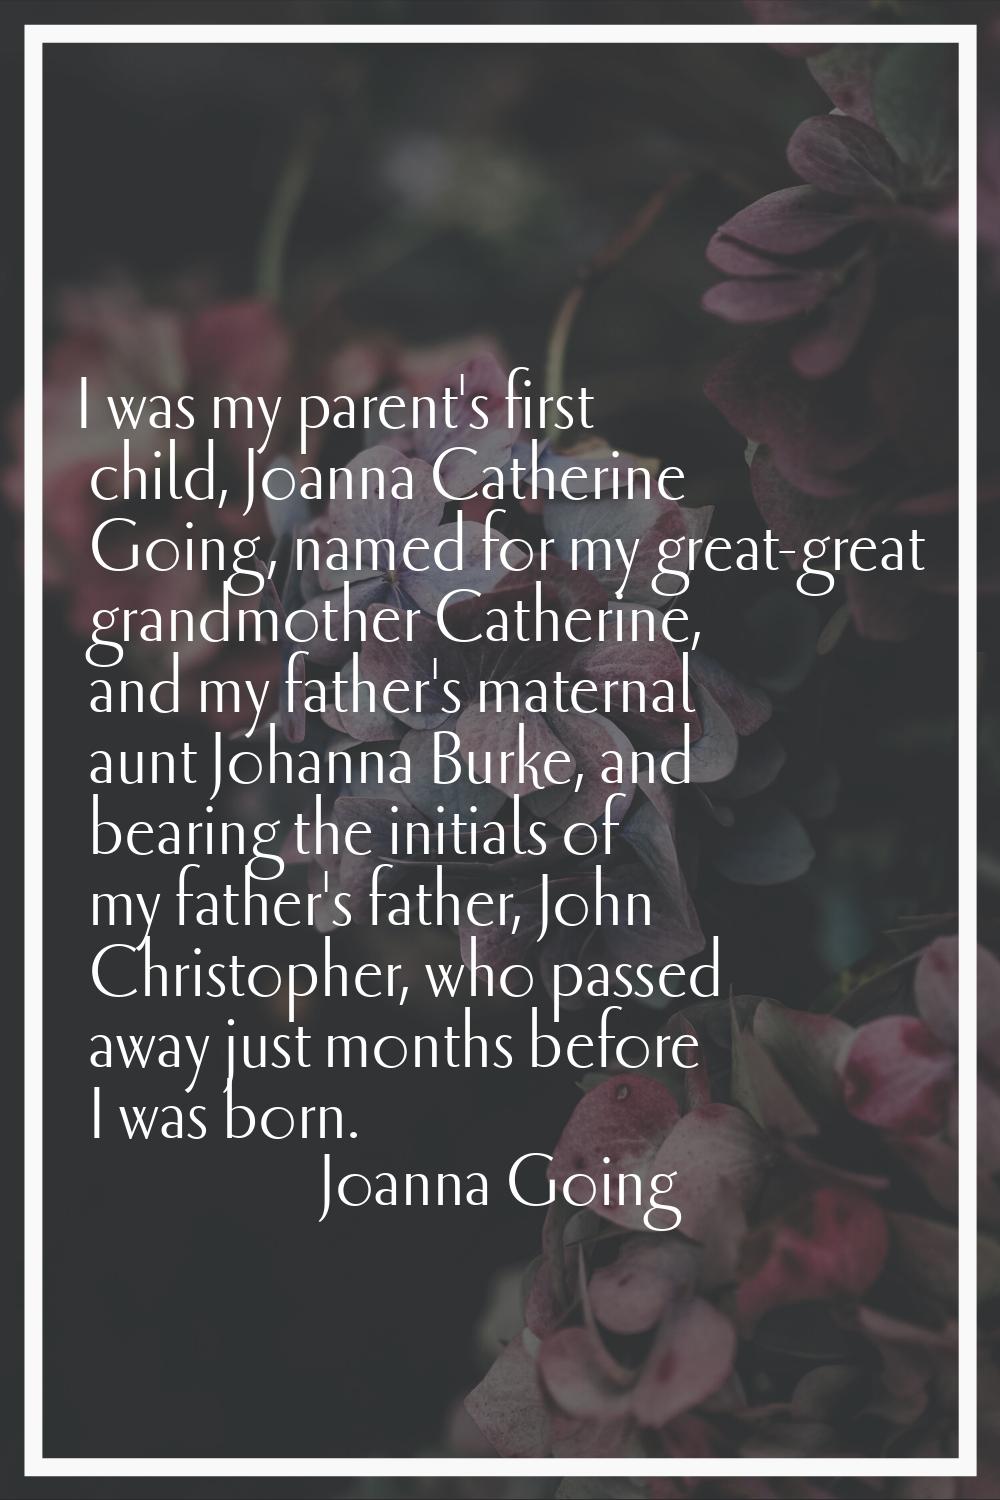 I was my parent's first child, Joanna Catherine Going, named for my great-great grandmother Catheri